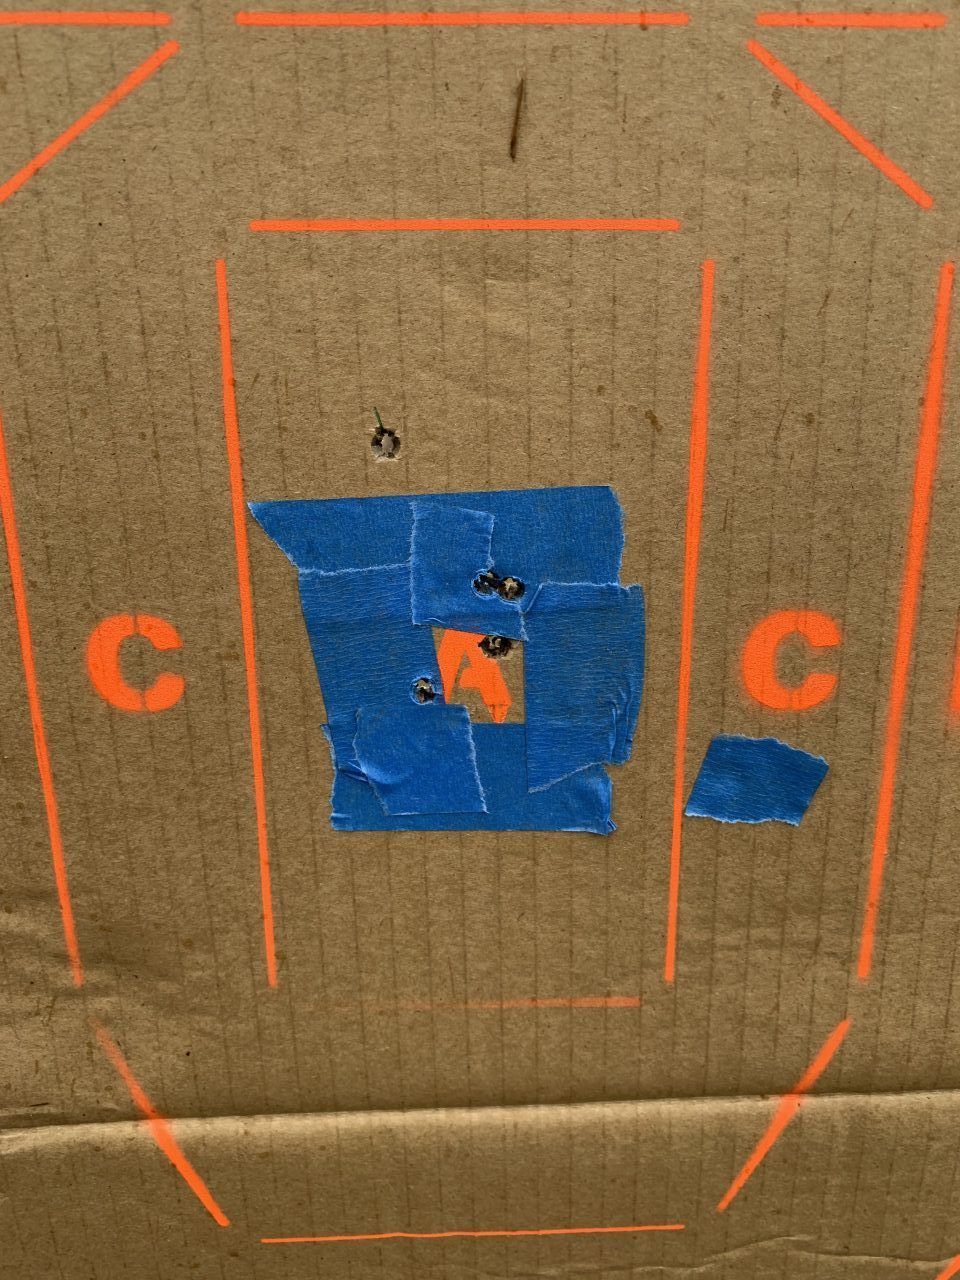 Outside of the tape was a previous shot, the four shot group was my final sight in group at 50 yards! 